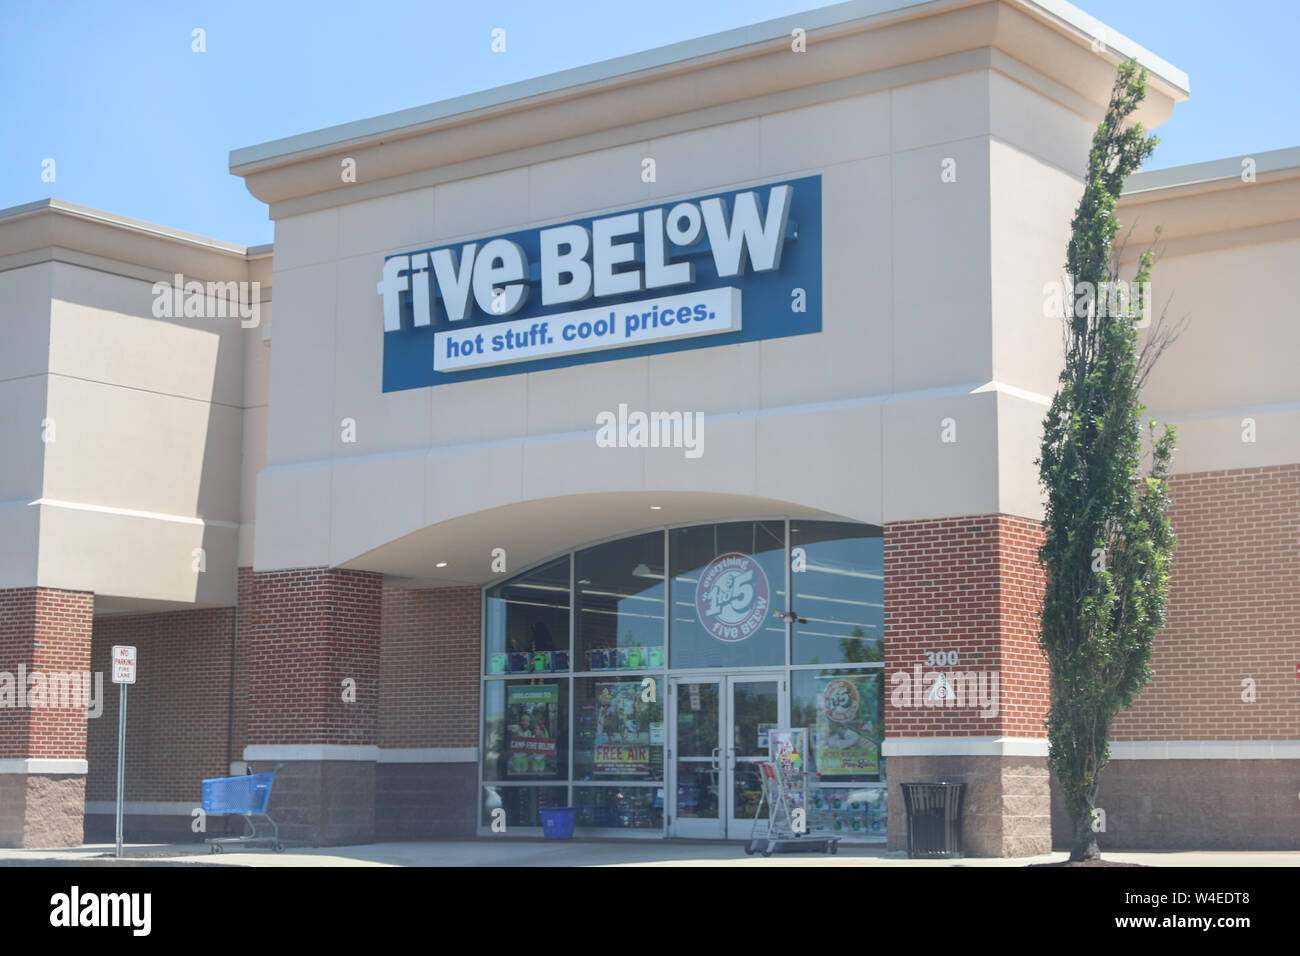 Princeton New Jersey - June 23, 2019: Five Below Retail Store. Five Below is a chain that sells products that cost up to $5 VI - Image Stock Photo